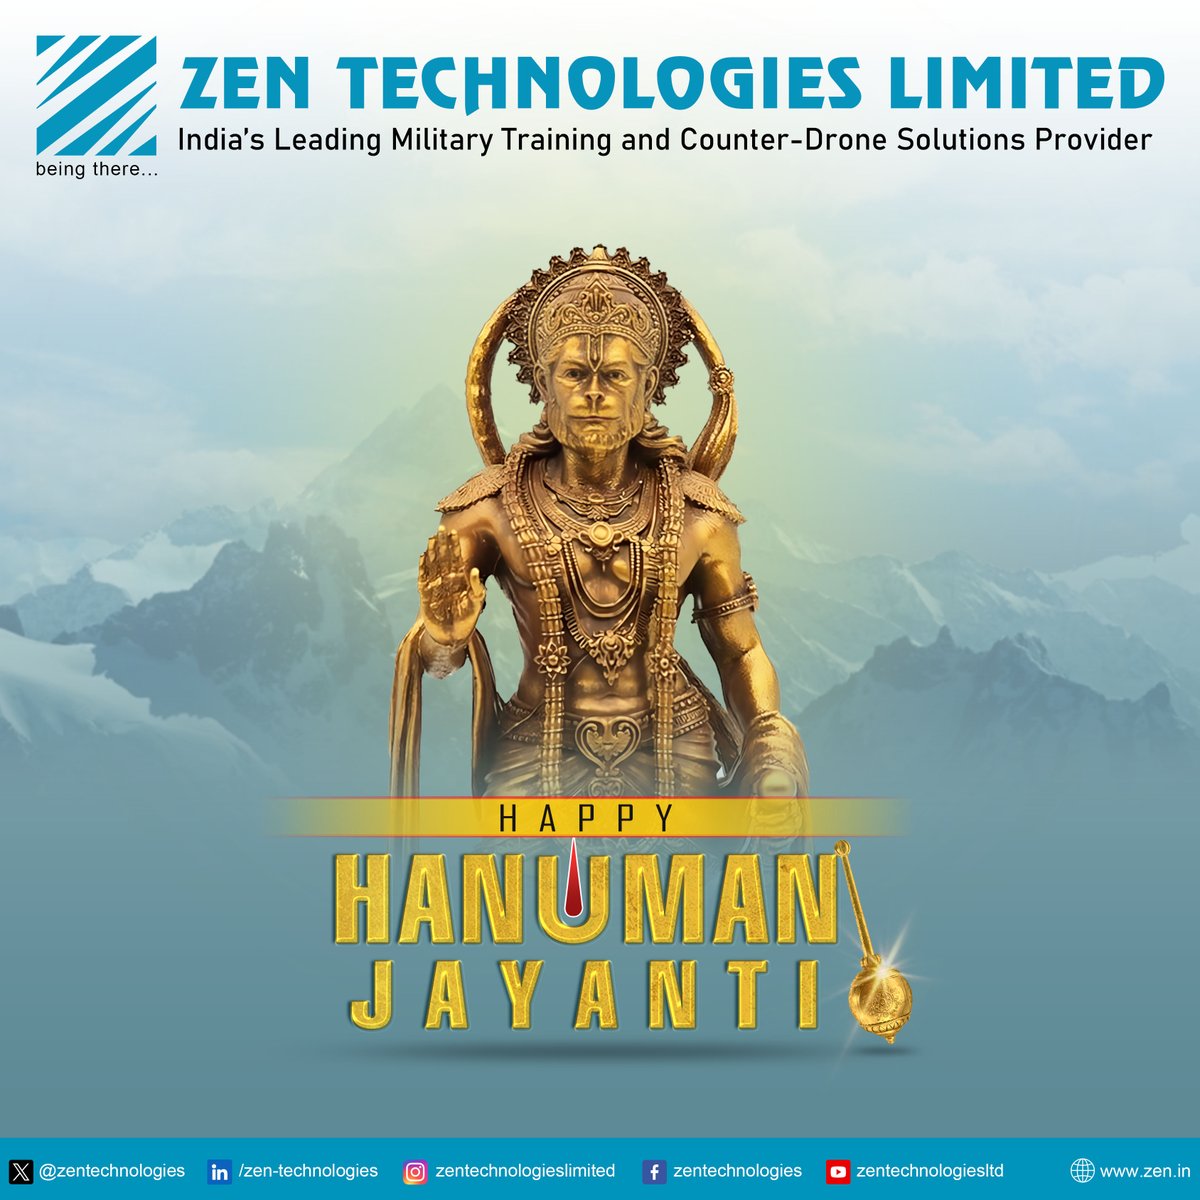 @ZenTechnologies extends warm wishes on the auspicious occasion of #HanumanJayanti to all our valued customers and esteemed stakeholders. May the blessings of Lord #Hanuman bring #strength, #courage, and #prosperity into your lives.
#hanumanjayanti2024 #FestiveGreetings #ZenTec